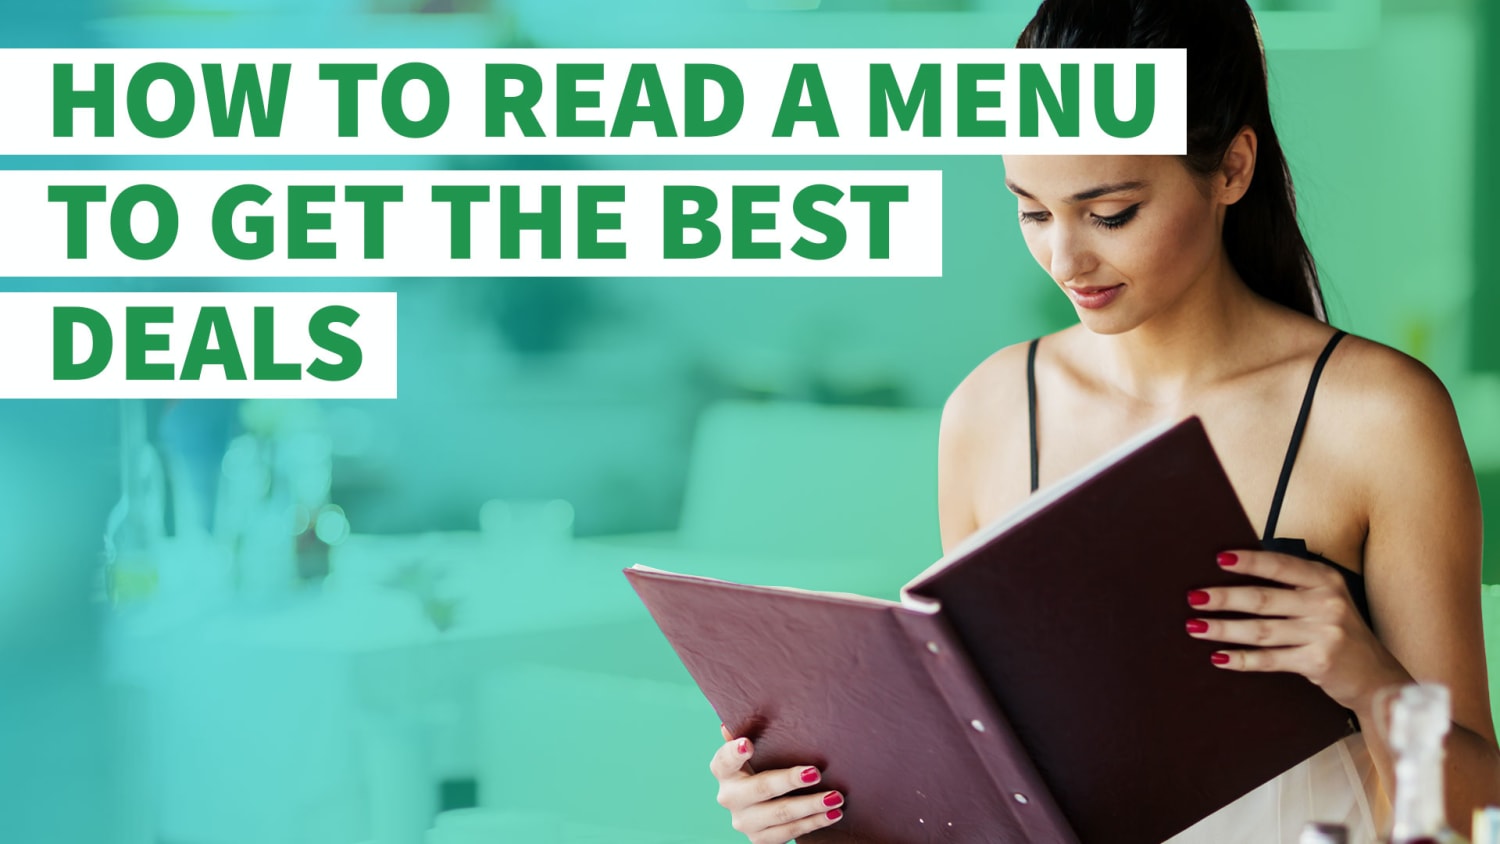 Hack the Menu: How to Get the Best Deals for Any Dinner Out